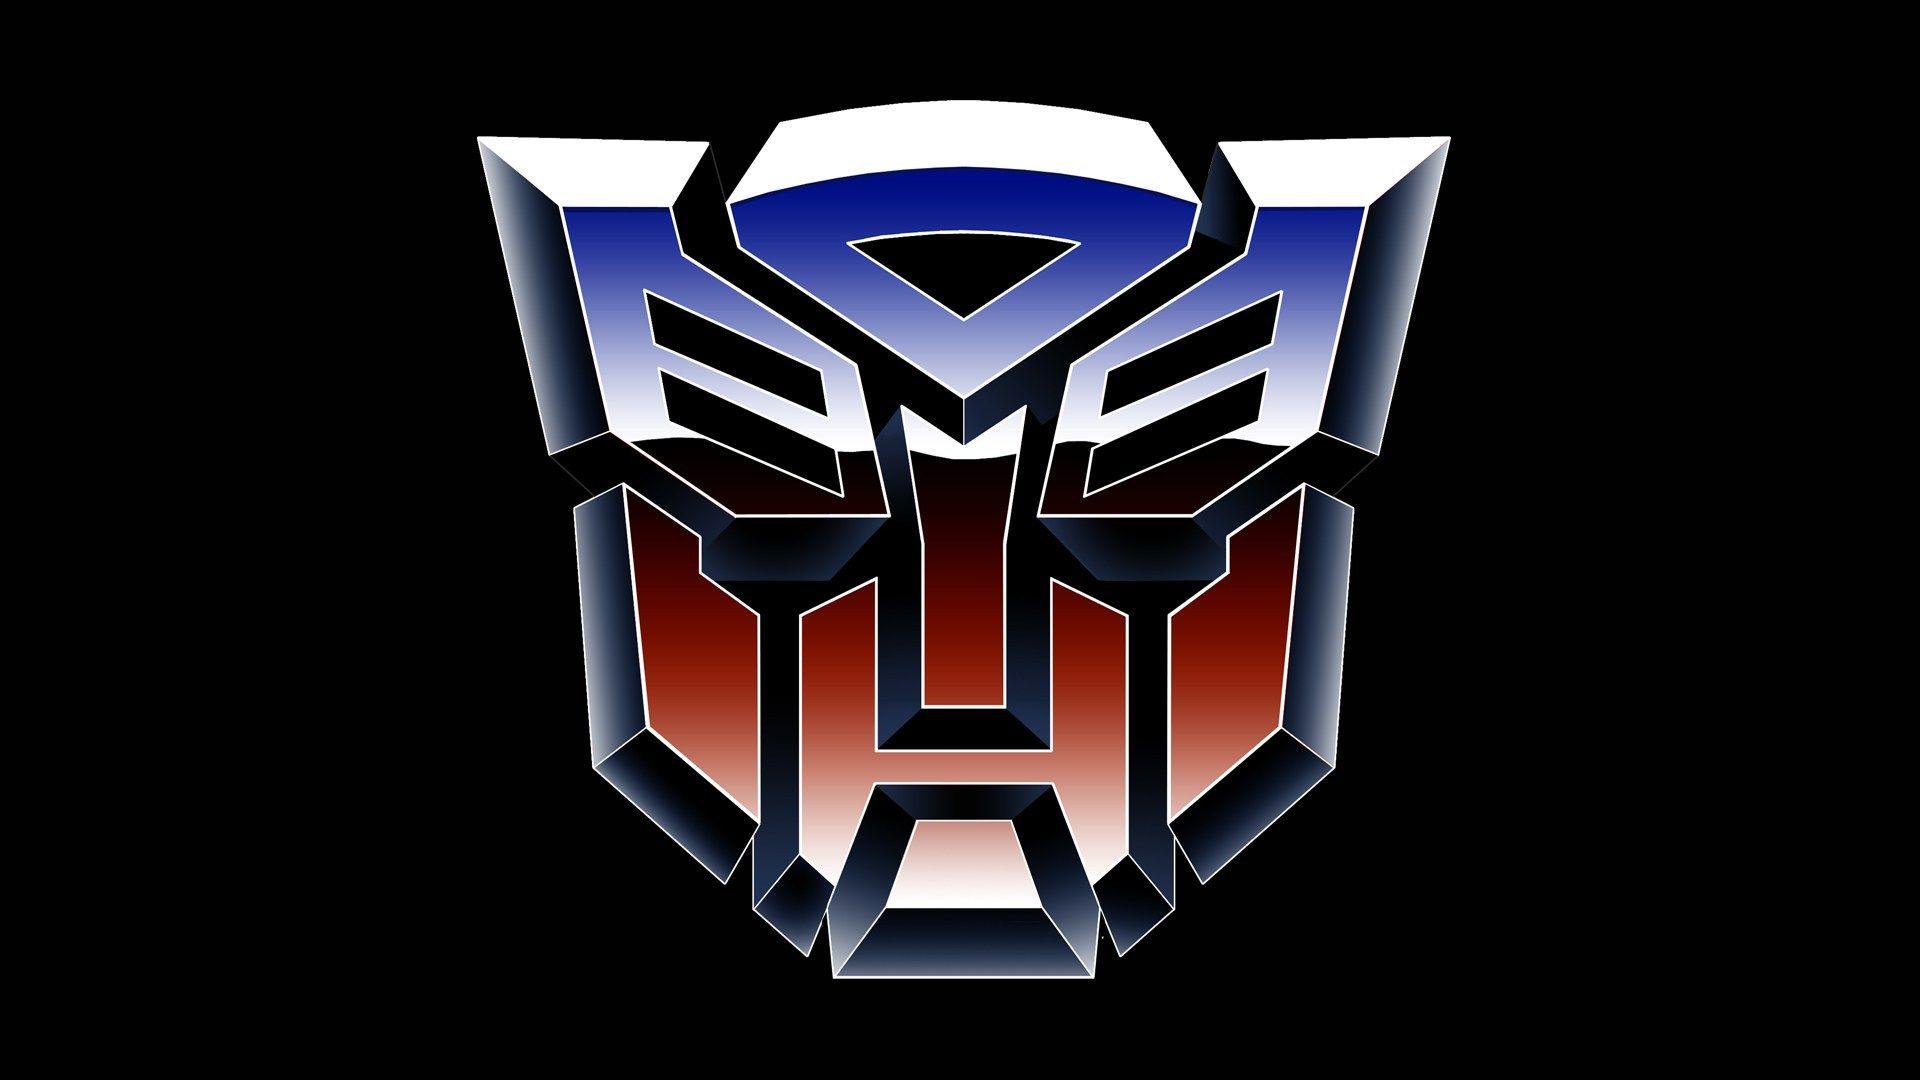 Edit Wallpaper Added 1 22 13 Transformers Car Background For Photo